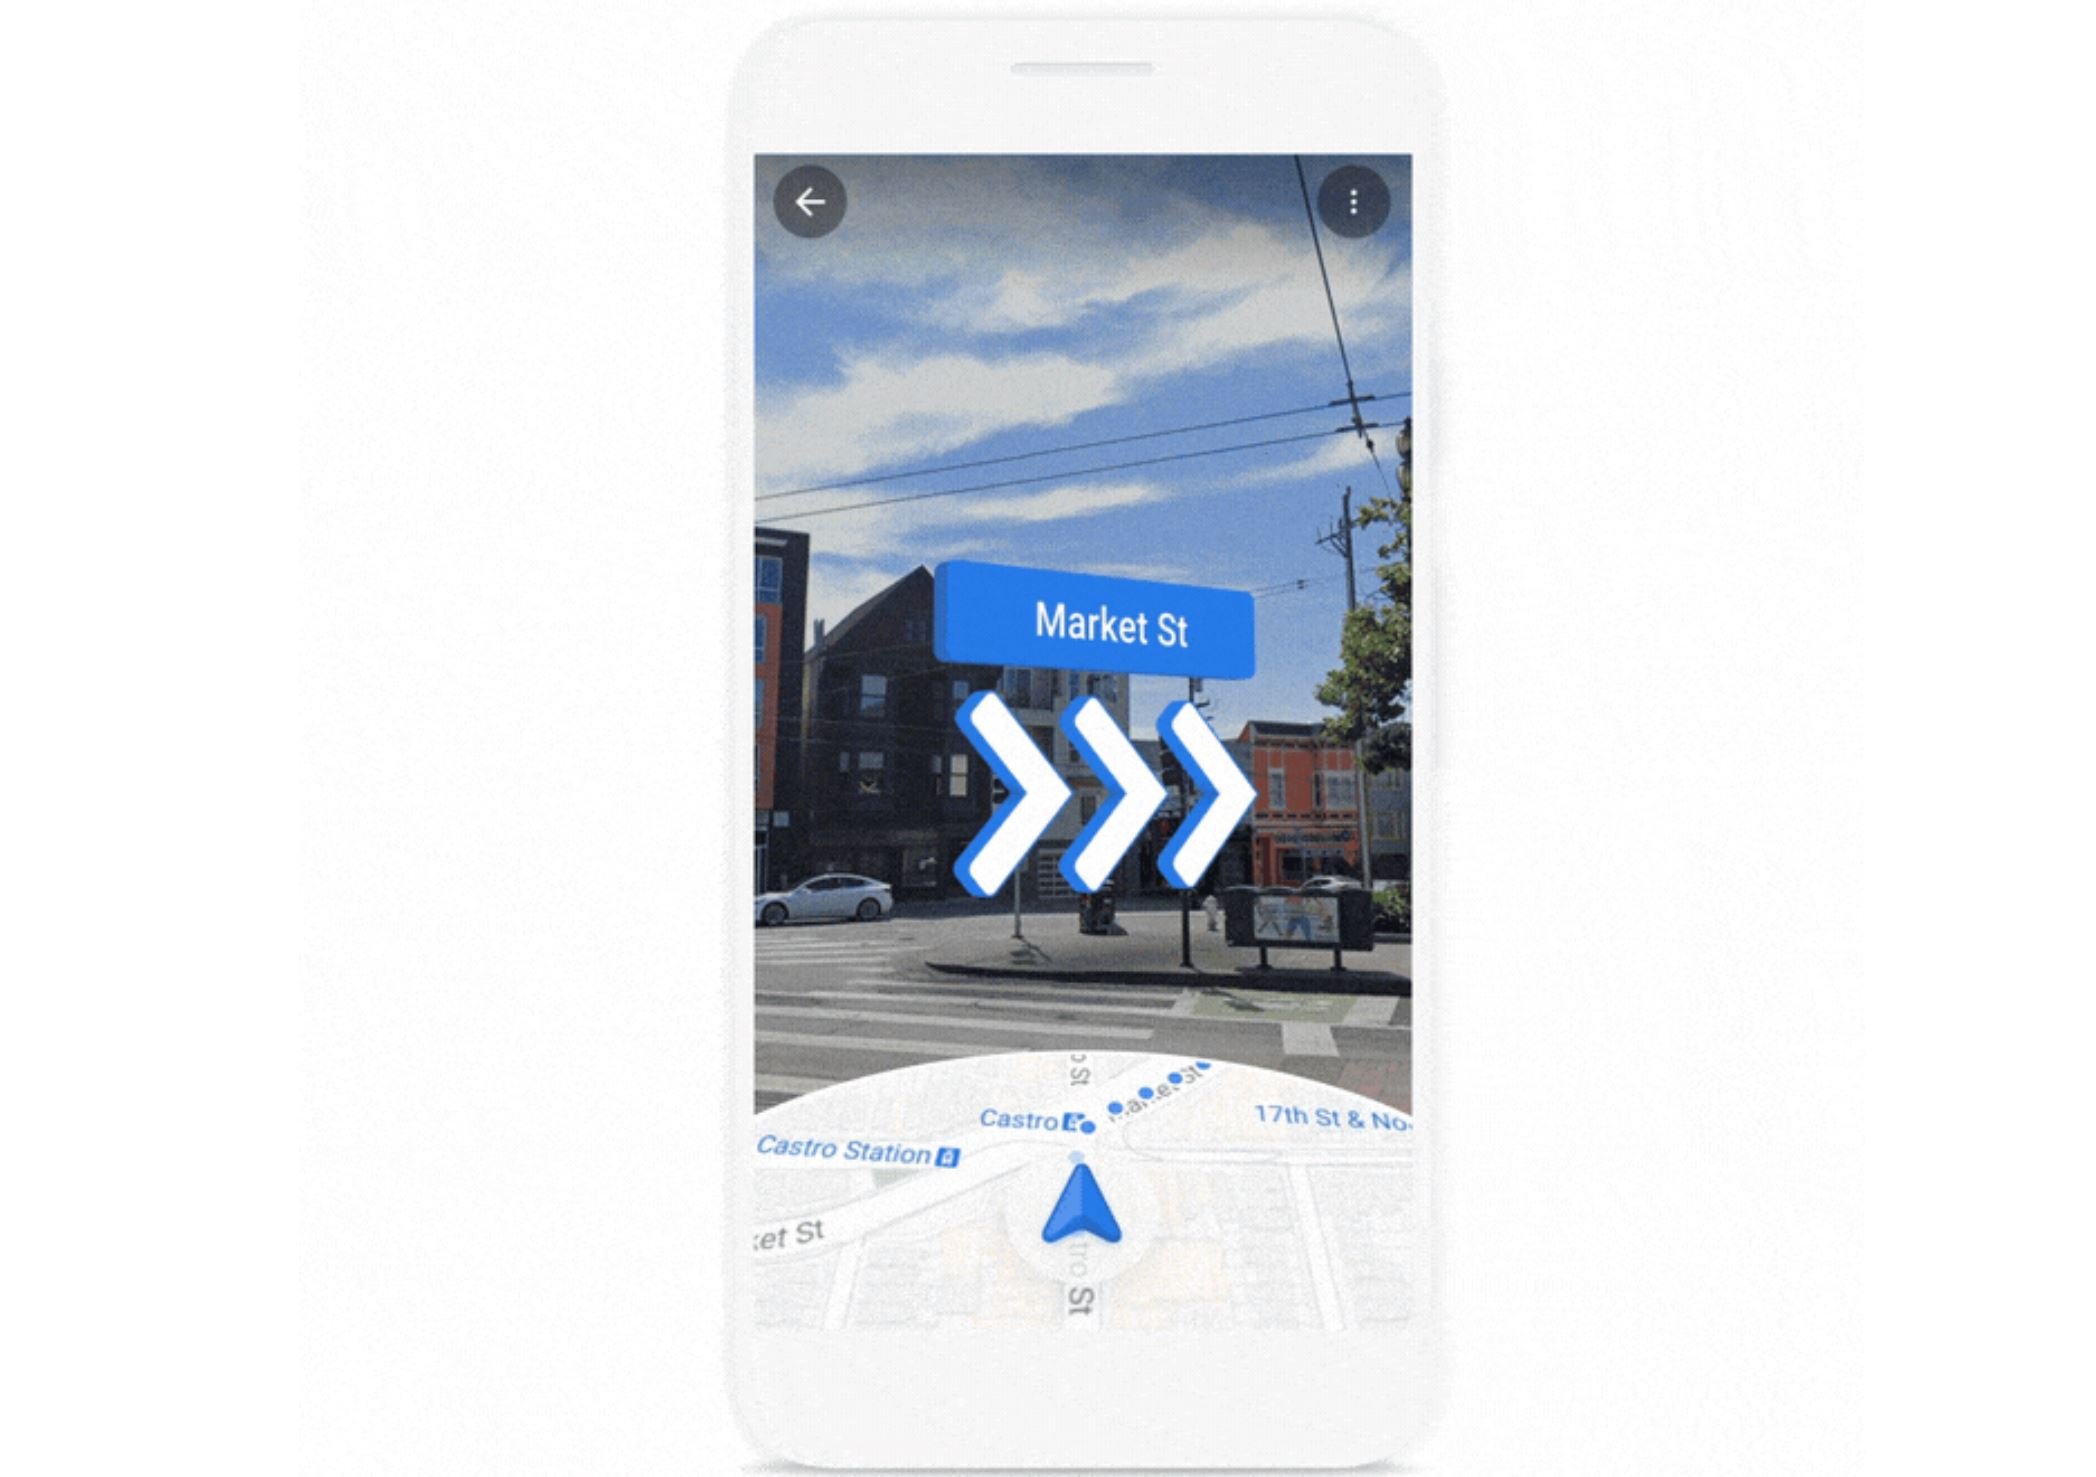 Live View (AR mode) in Google Maps gets a major update